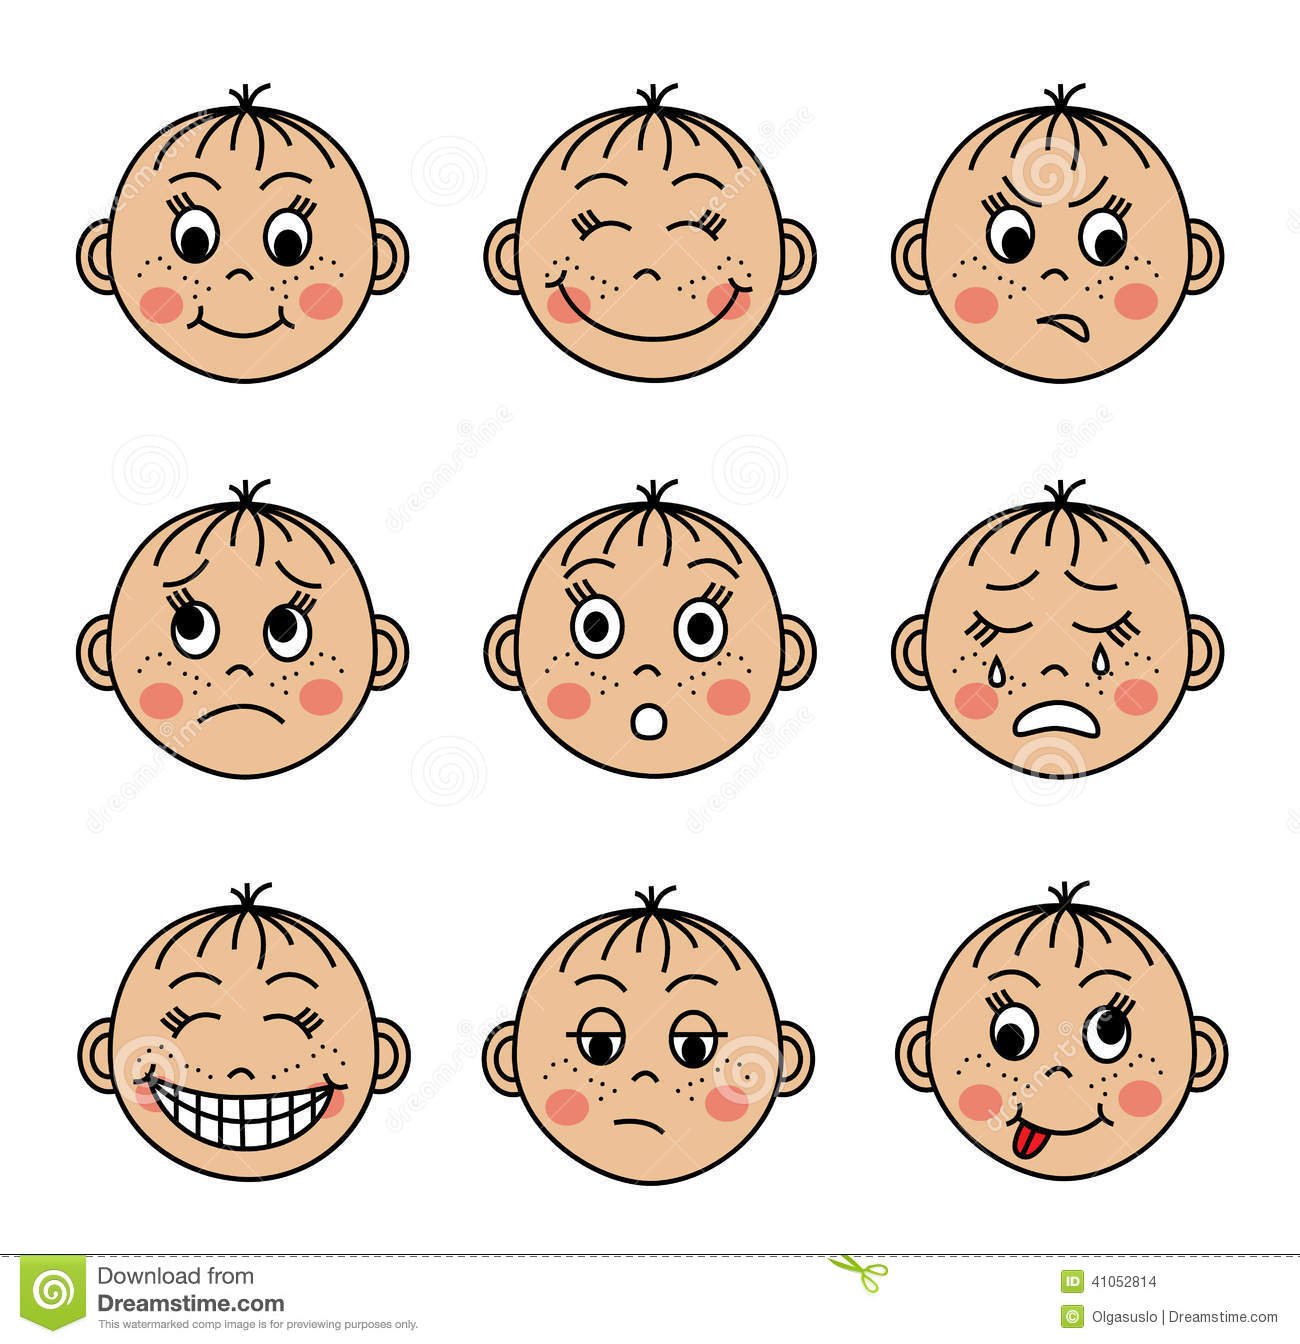     Faces With Different Emotions Stock Vector   Image  41052814